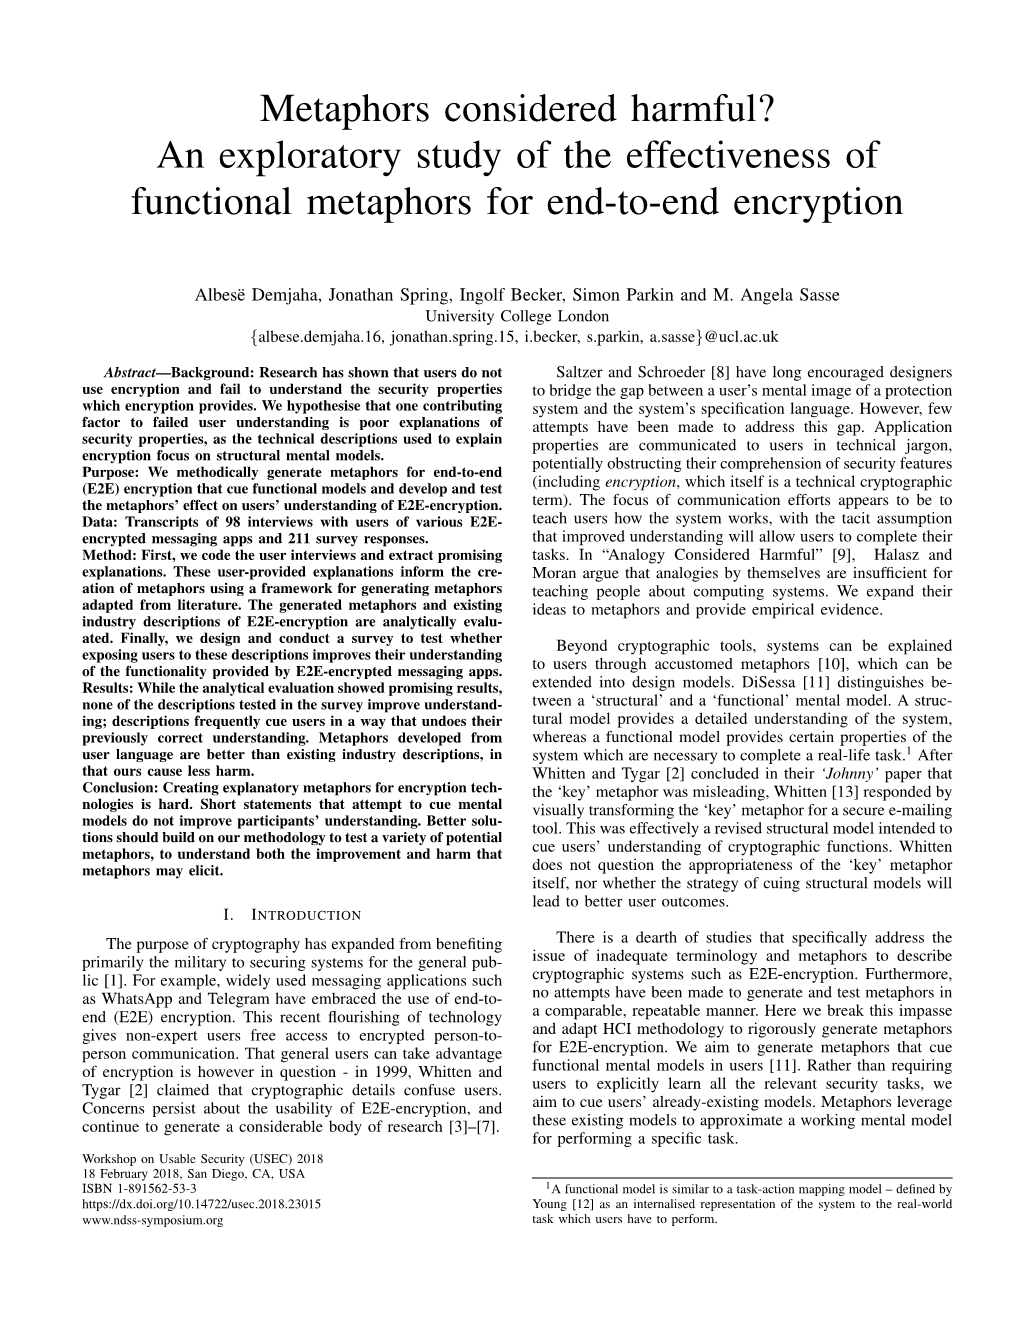 An Exploratory Study of the Effectiveness of Functional Metaphors for End-To-End Encryption